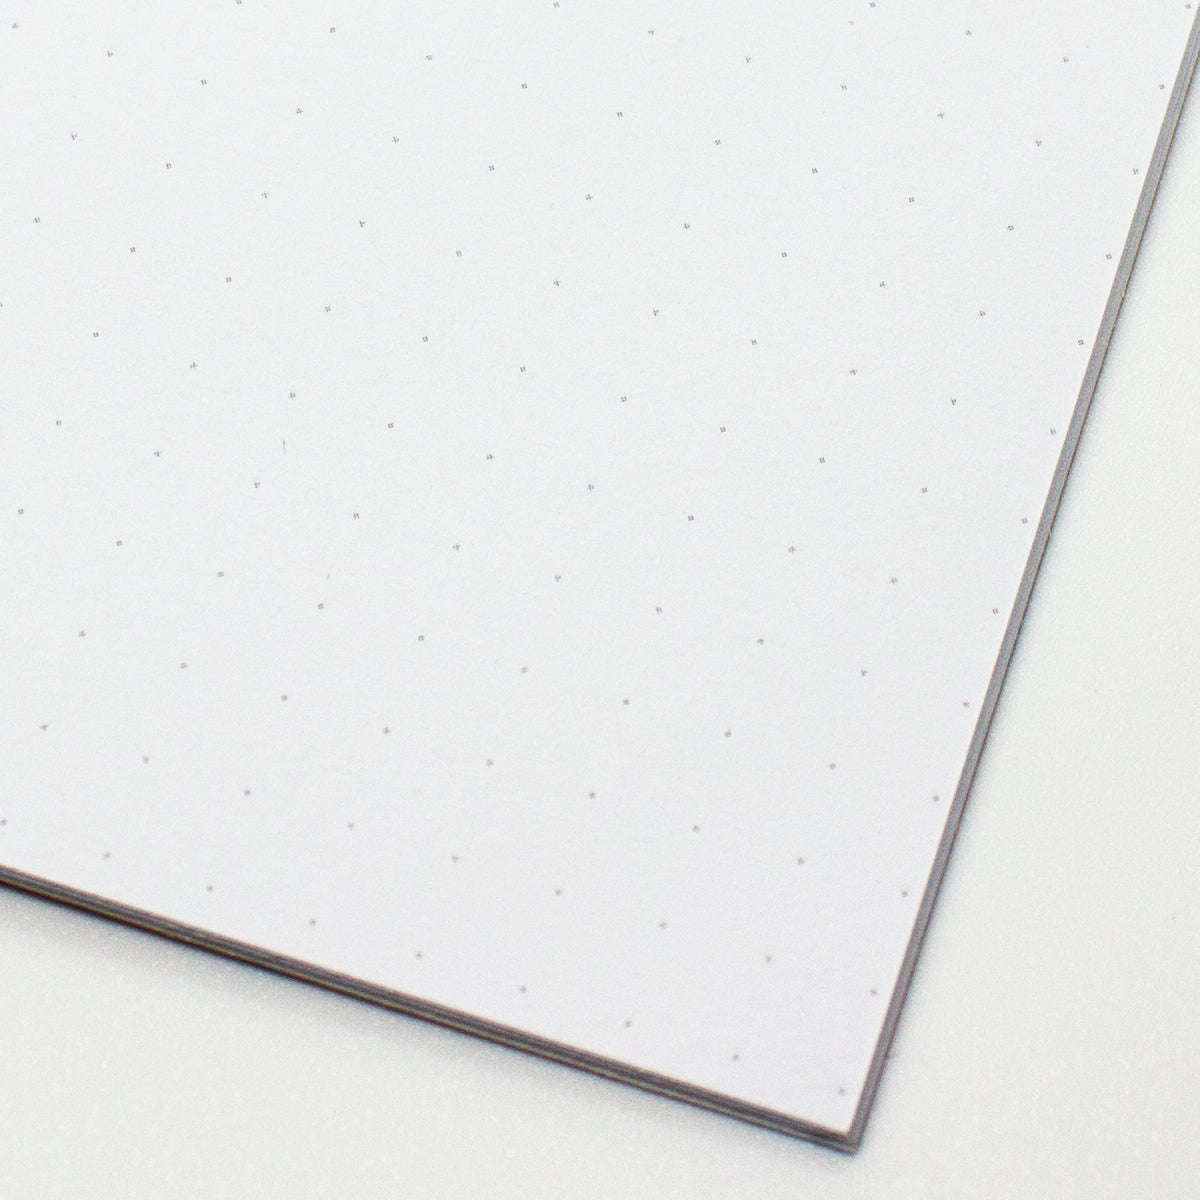 Notes Notebook Set of 2 - Dot Grid & Blank